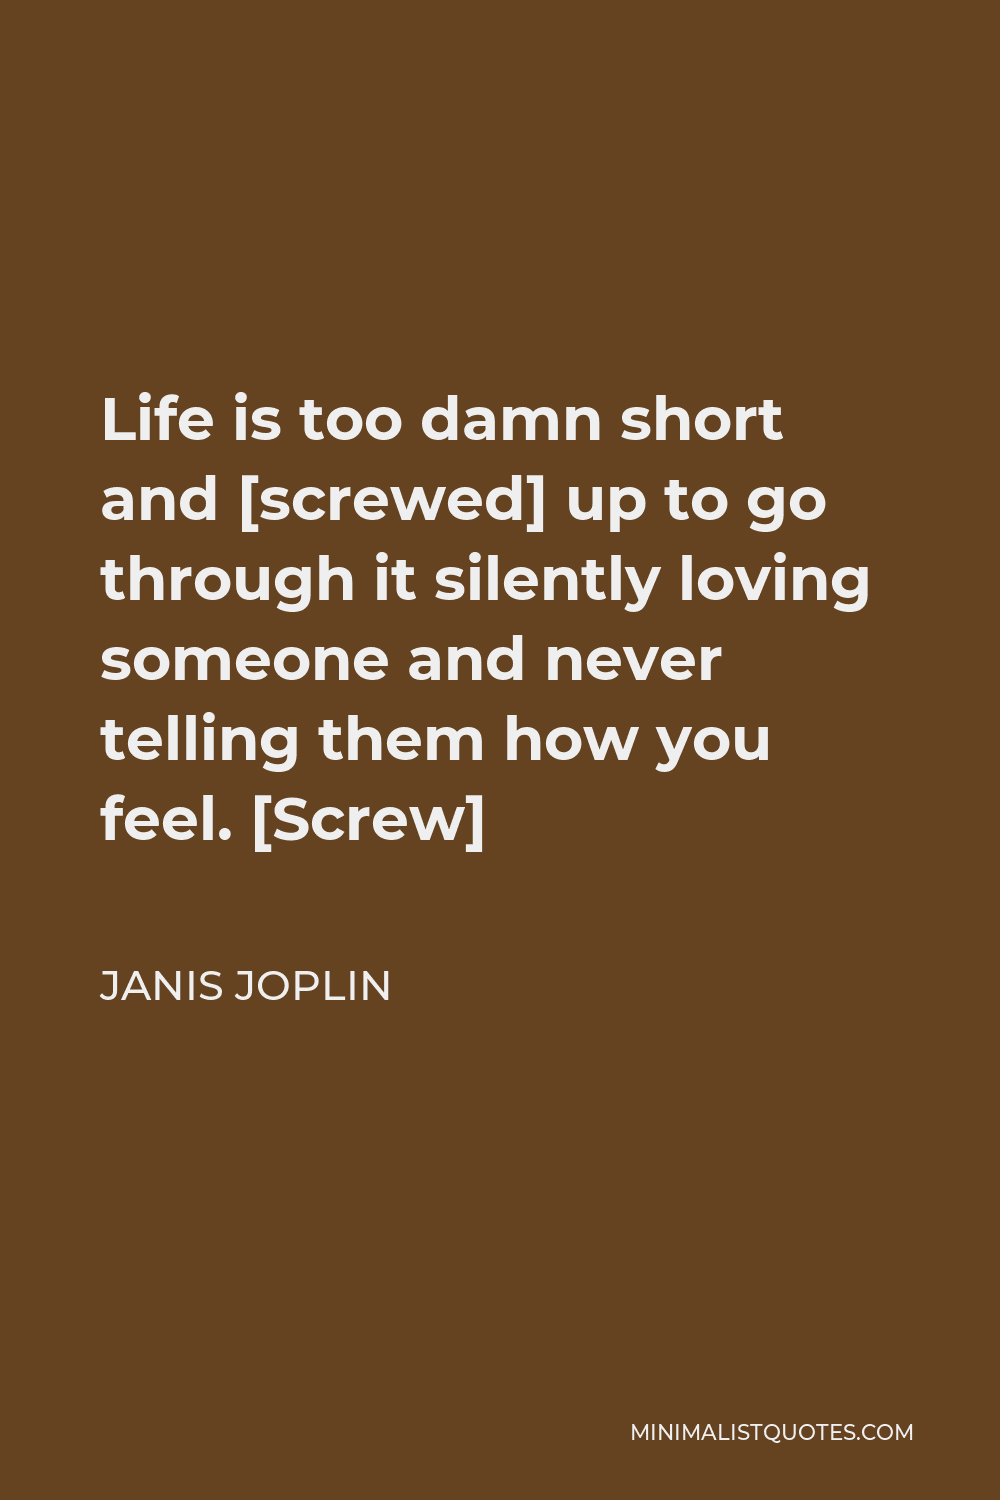 Janis Joplin Quote - Life is too damn short and [screwed] up to go through it silently loving someone and never telling them how you feel. [Screw]